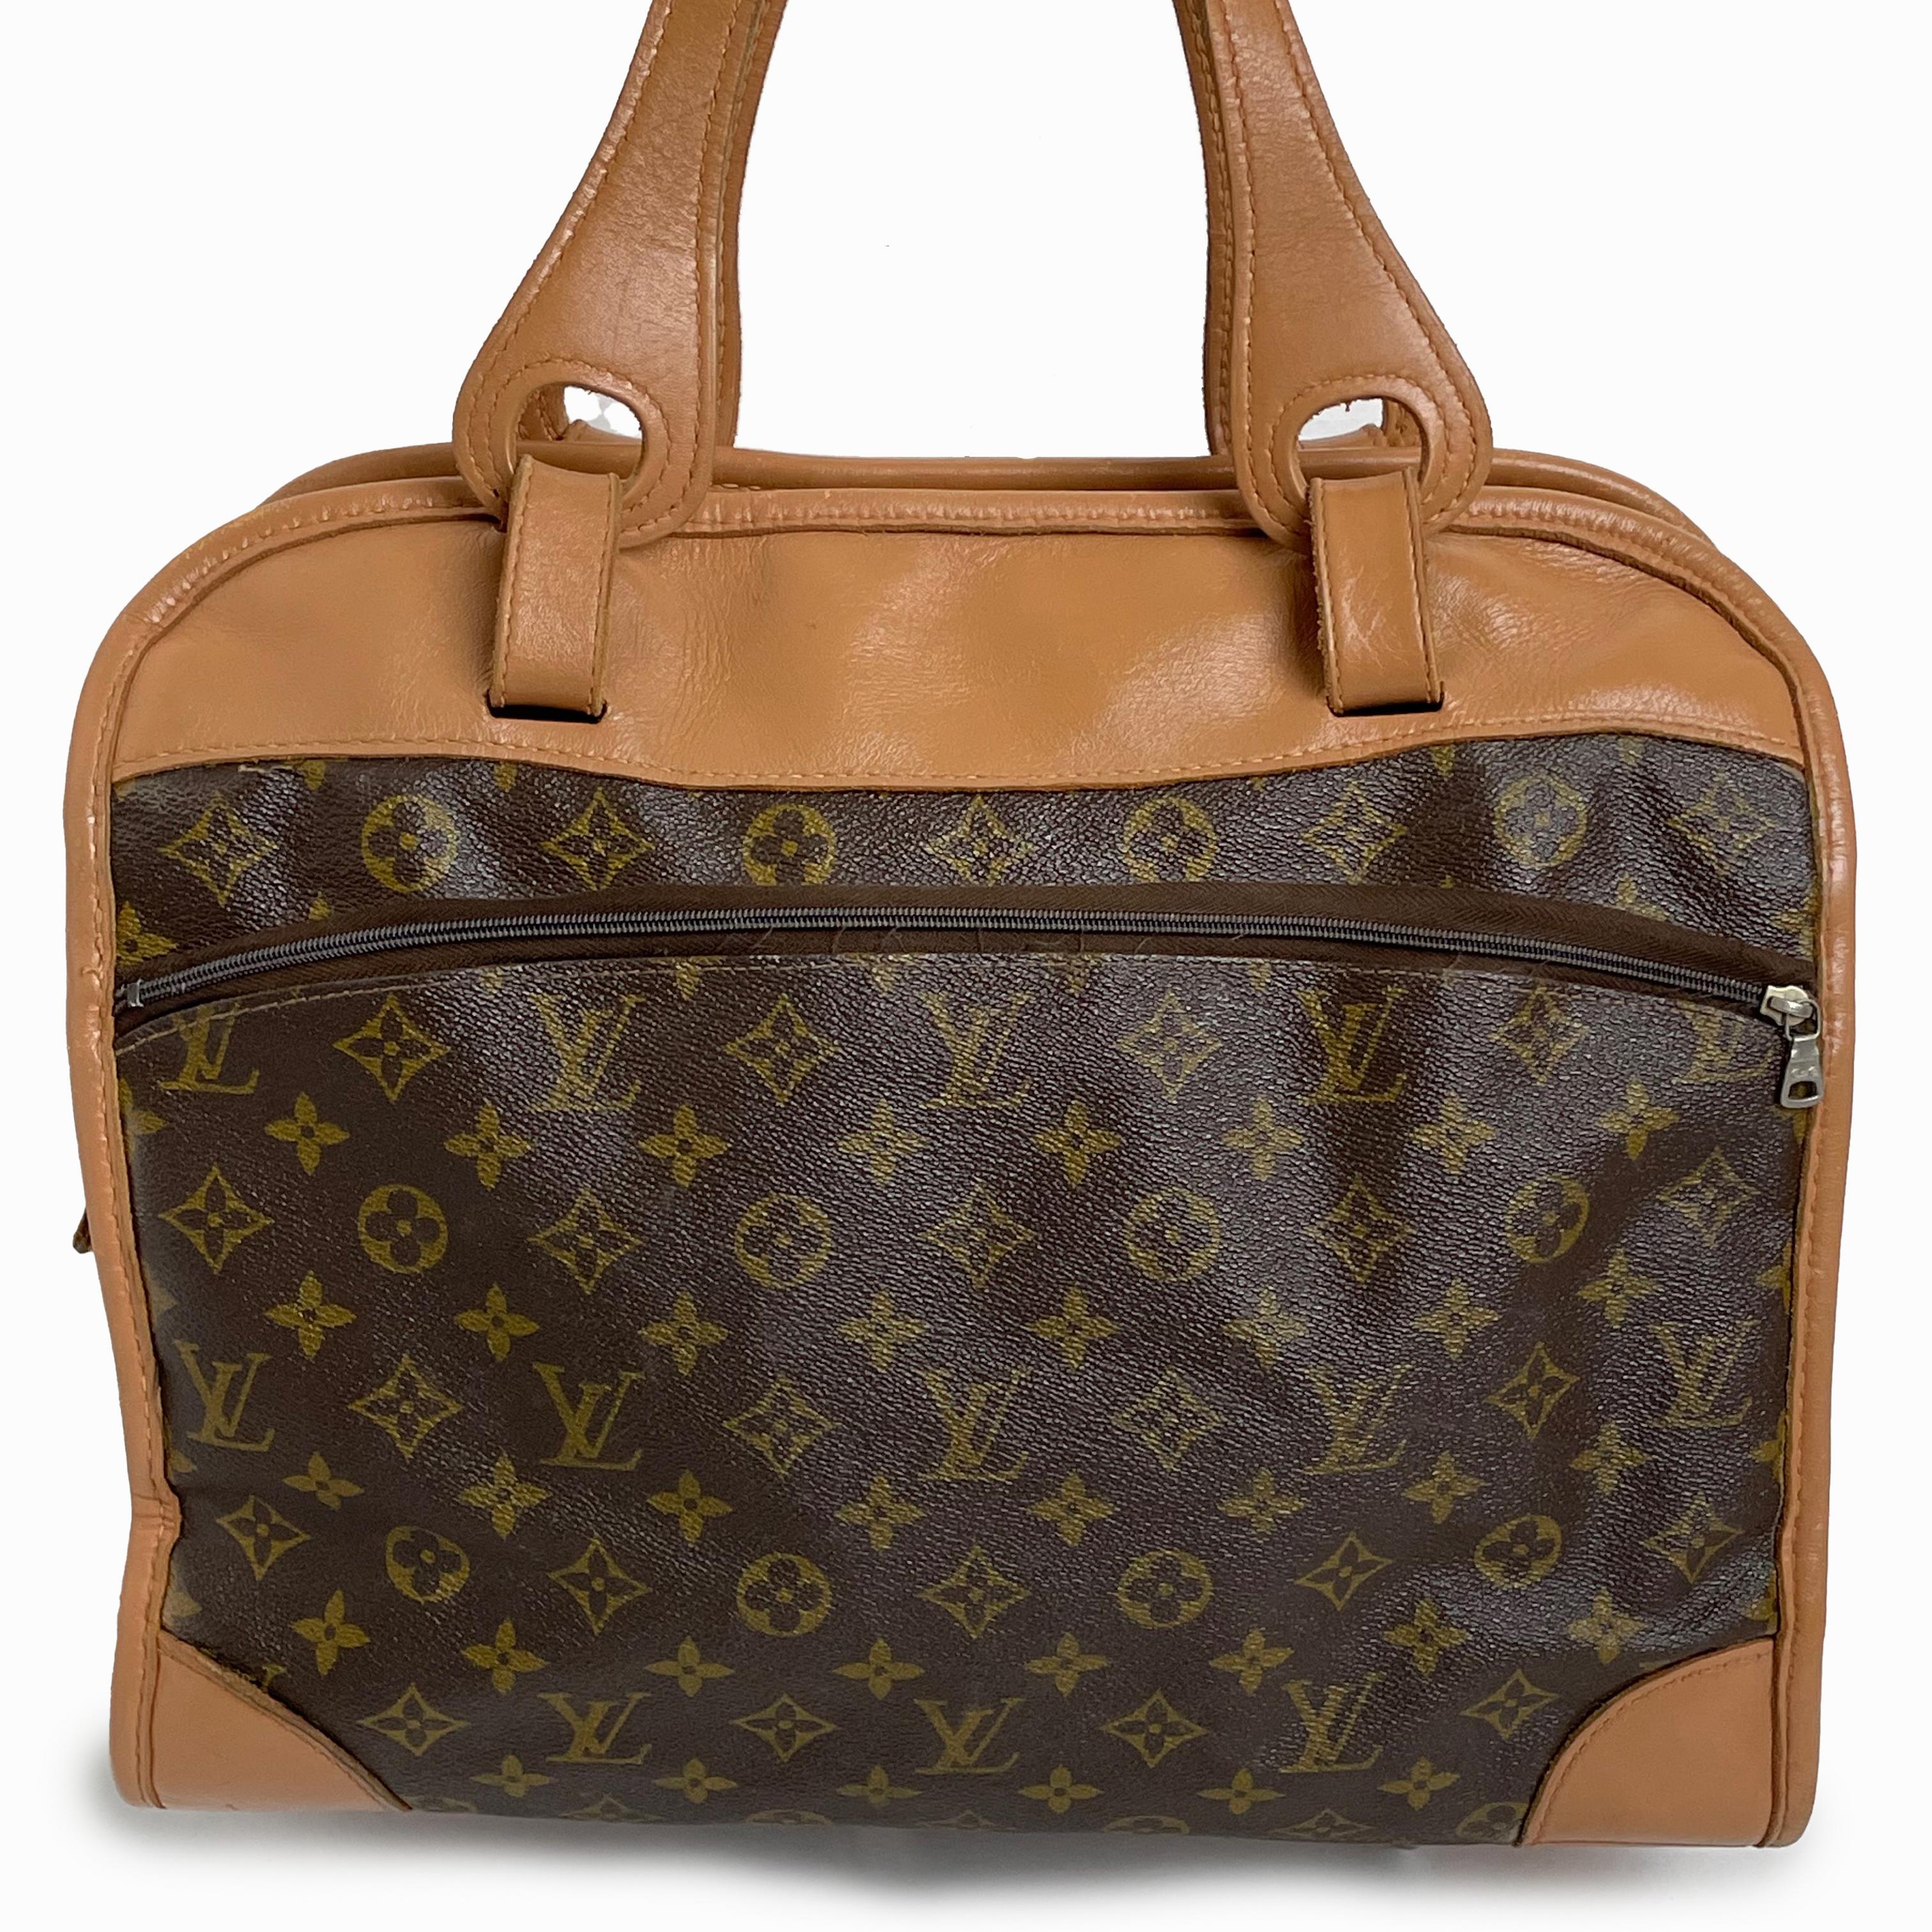 Louis Vuitton Tote Bag Travel Carry On French Luggage Co Saks 5th Ave Vintage  For Sale 4